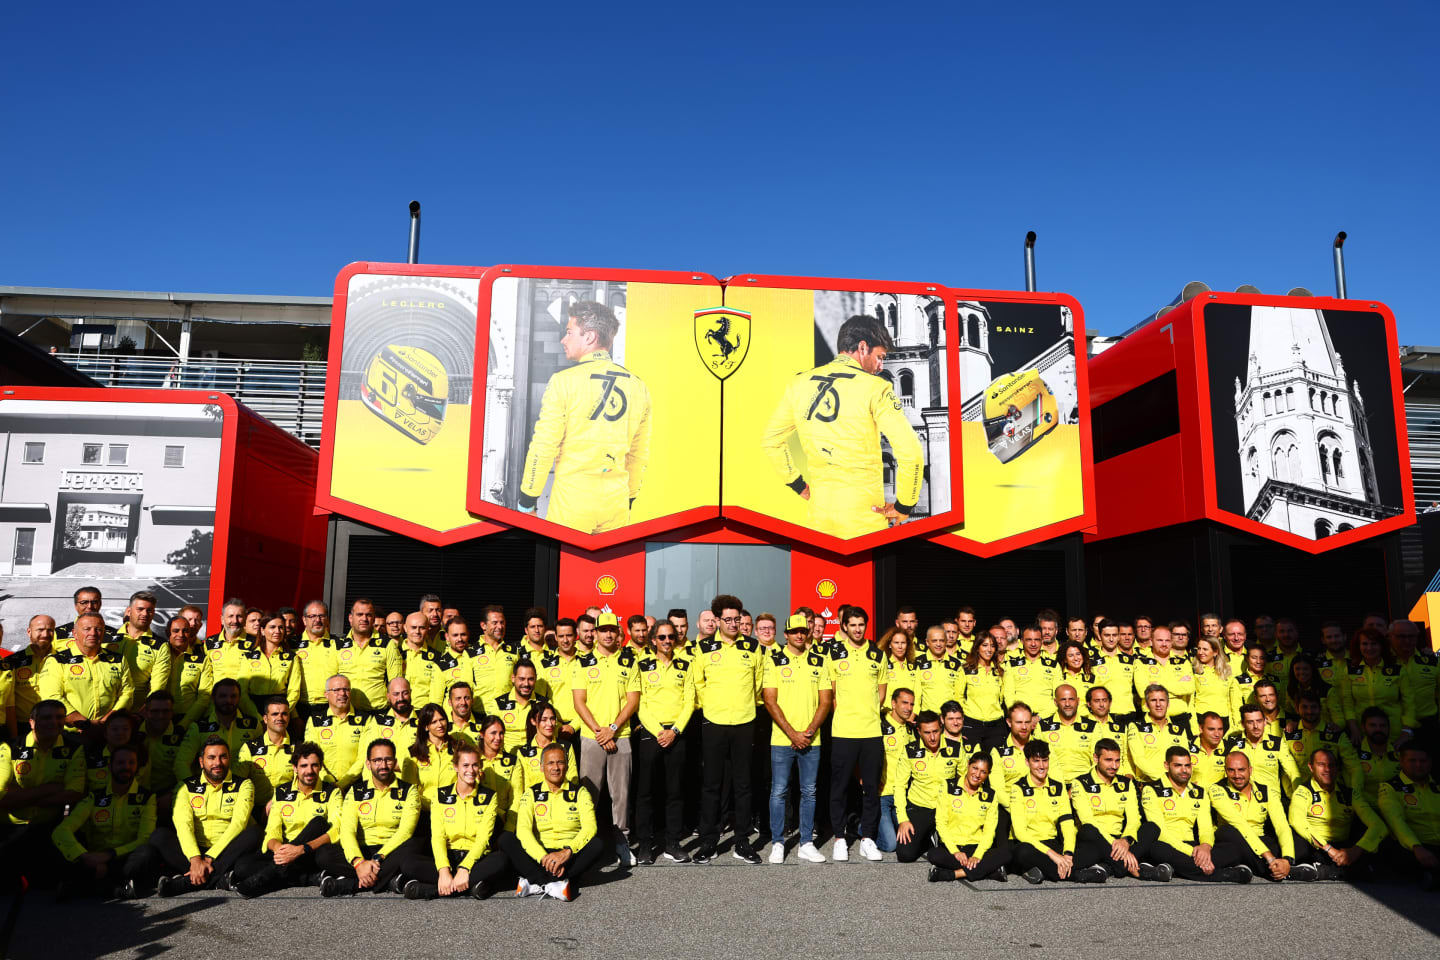 MONZA, ITALY - SEPTEMBER 11: The Ferrari team pose for a photo to commemorate the teams 75th